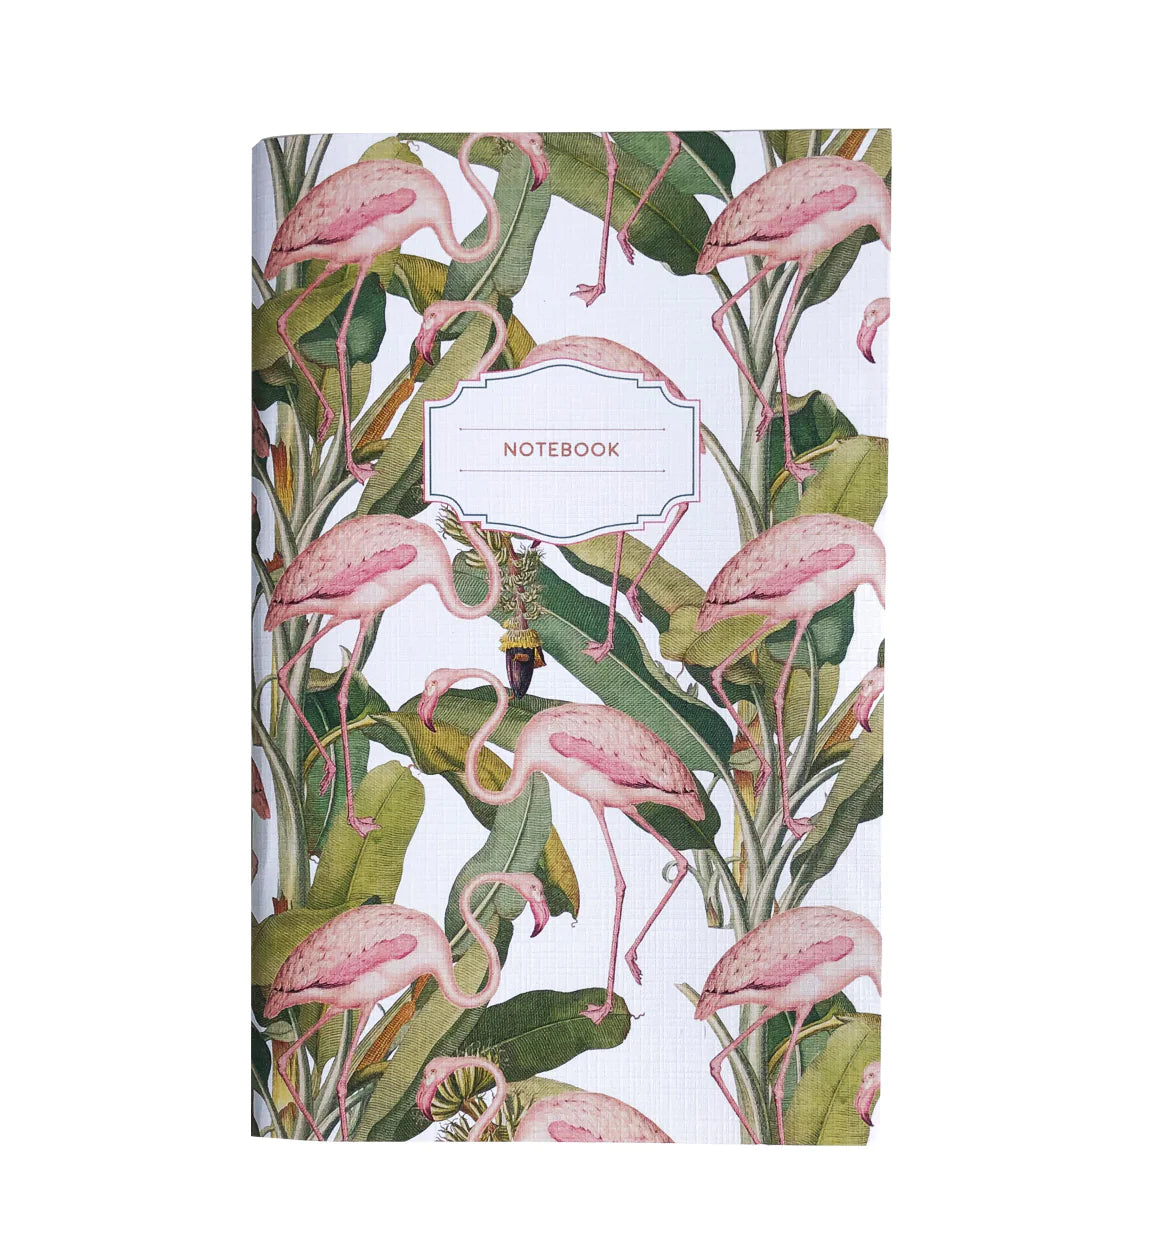 Artistry Notebooks - 2 Pack (Large)